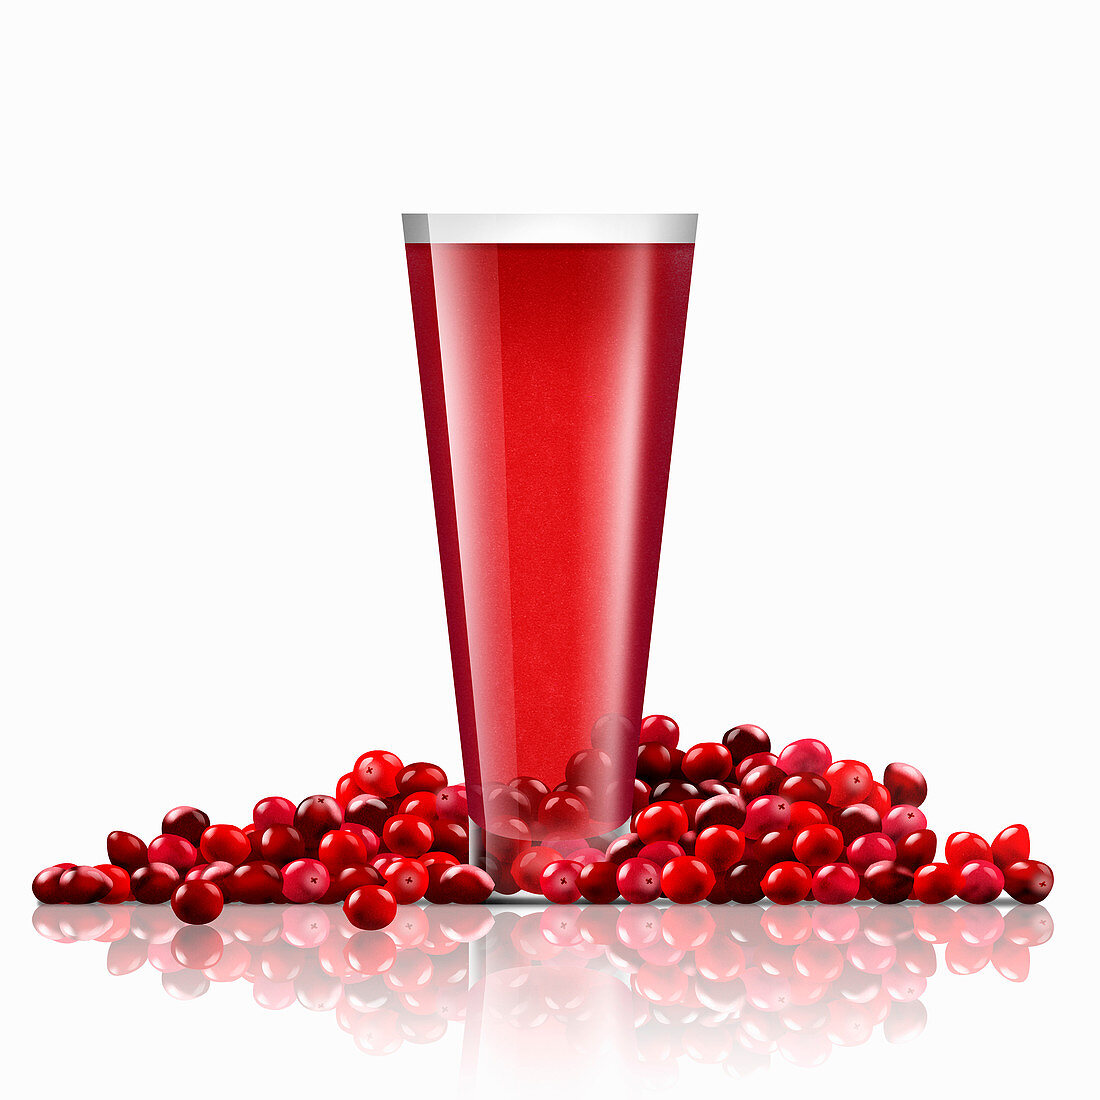 Fresh cranberries and glass of cranberry juice, illustration